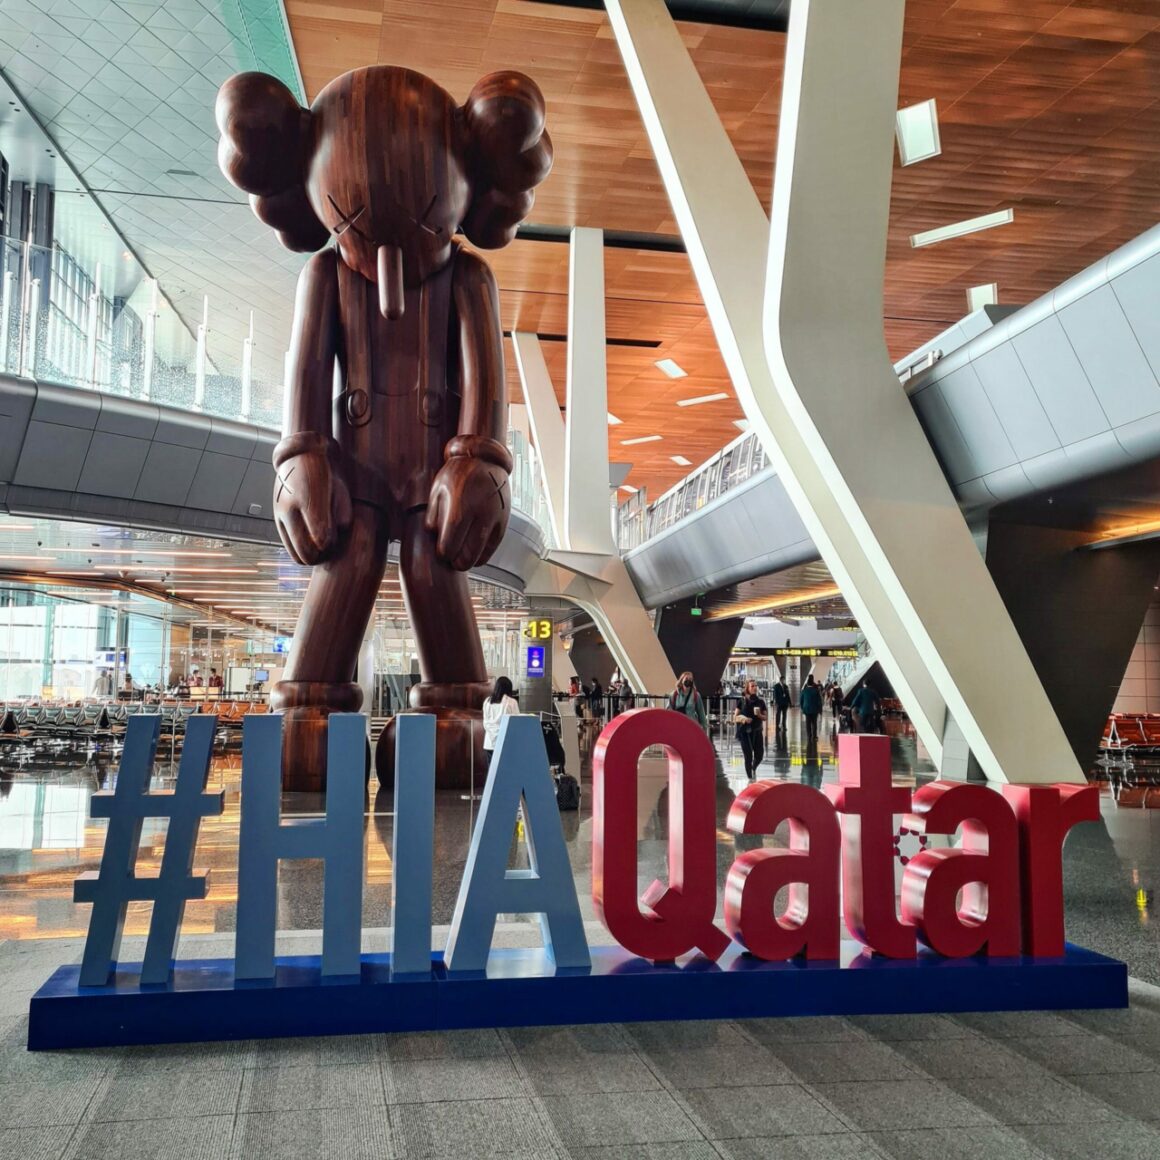 'Small Lie' by American artist KAWS at Hamad International Airport